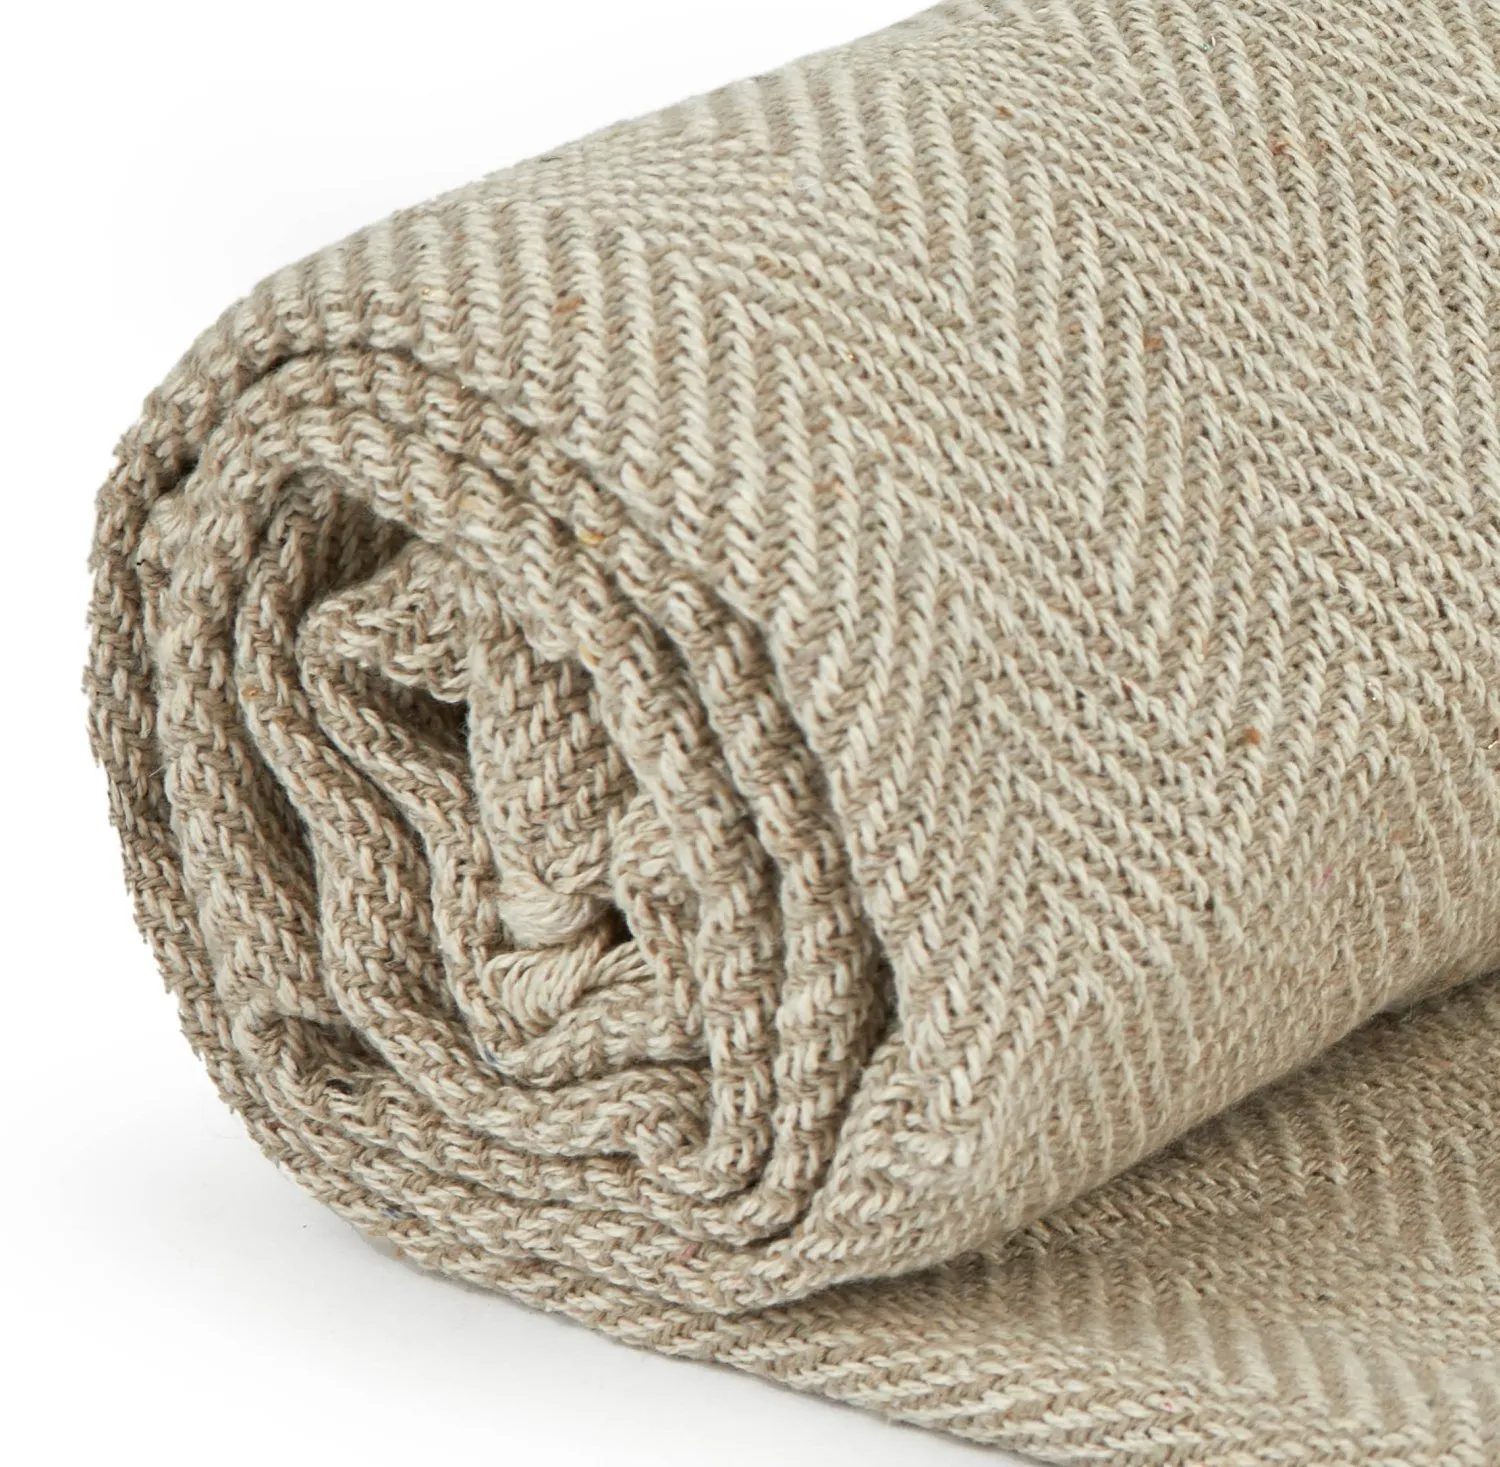 harringbone recycled natural cotton blanket detail